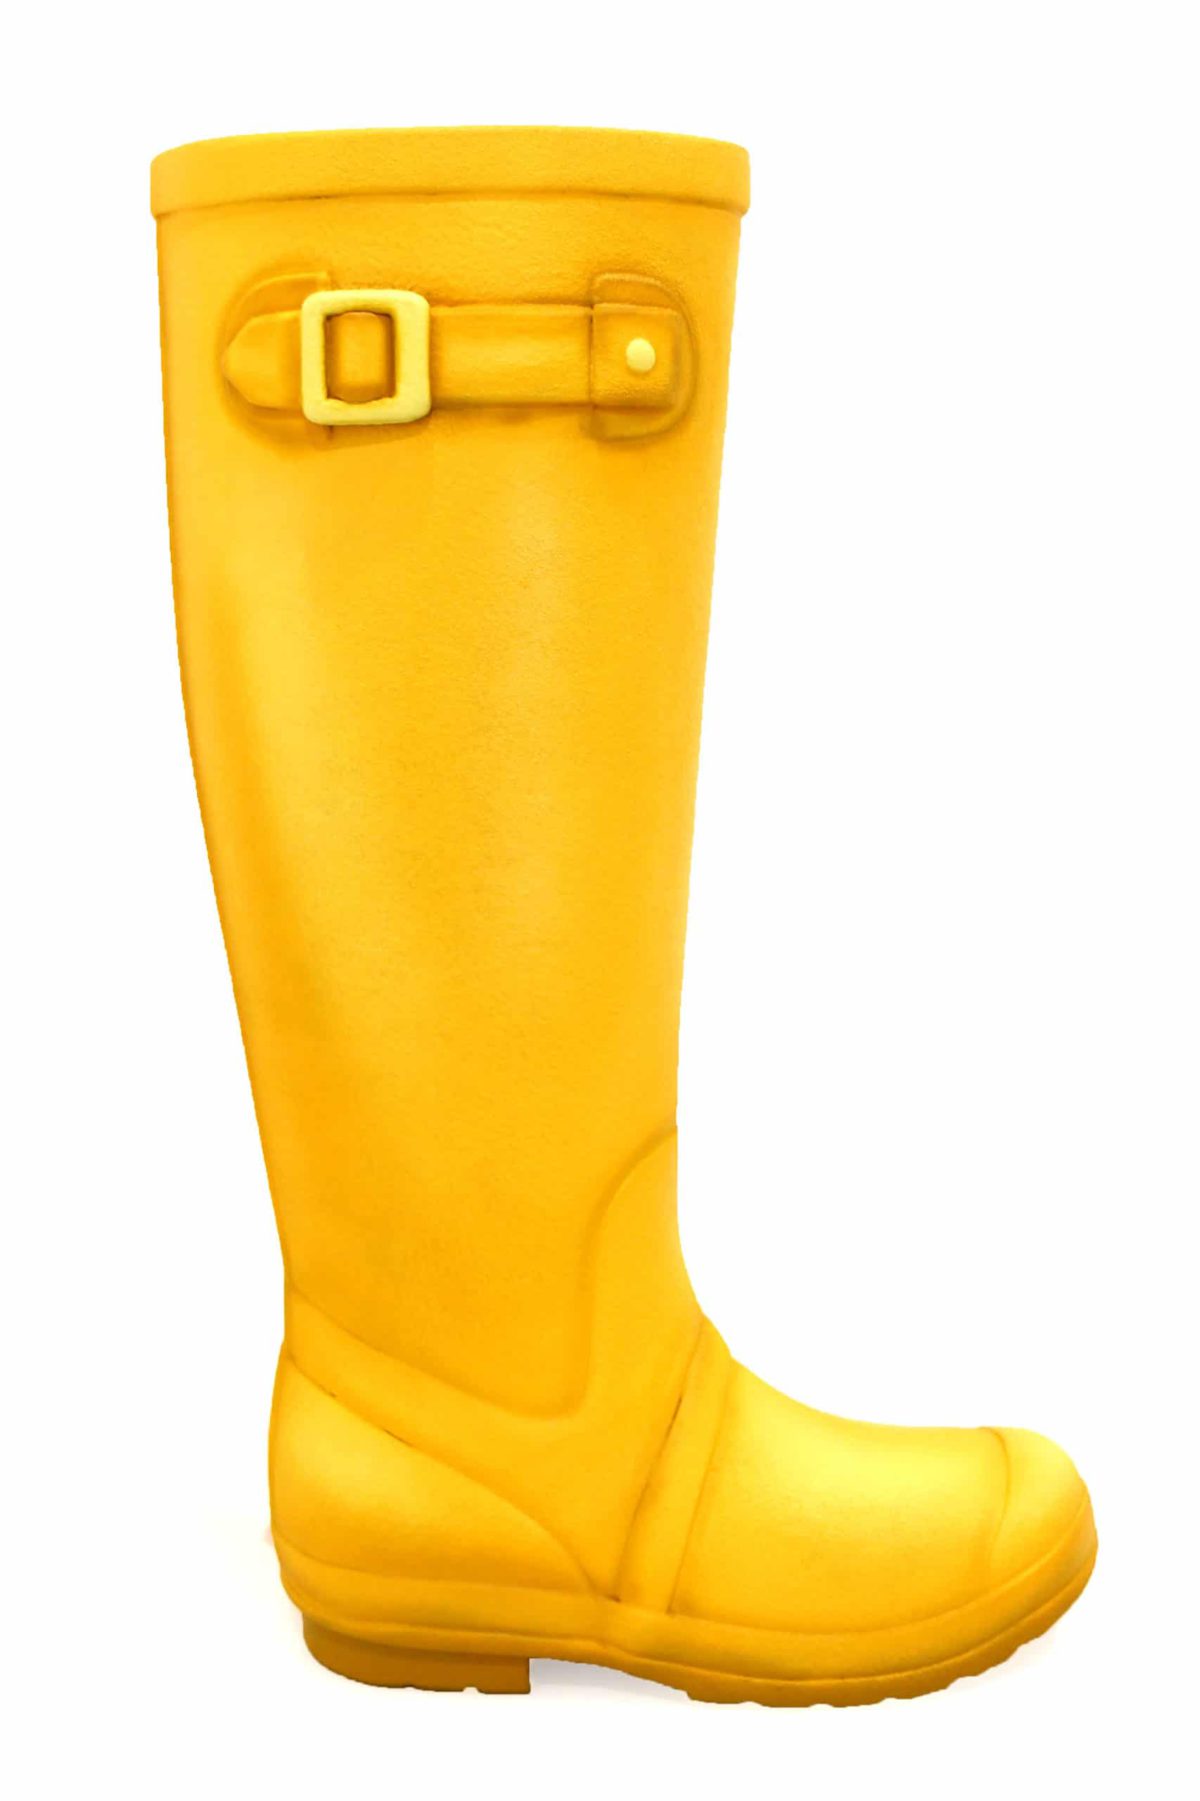 Giant Yellow Welly Boot (Right)